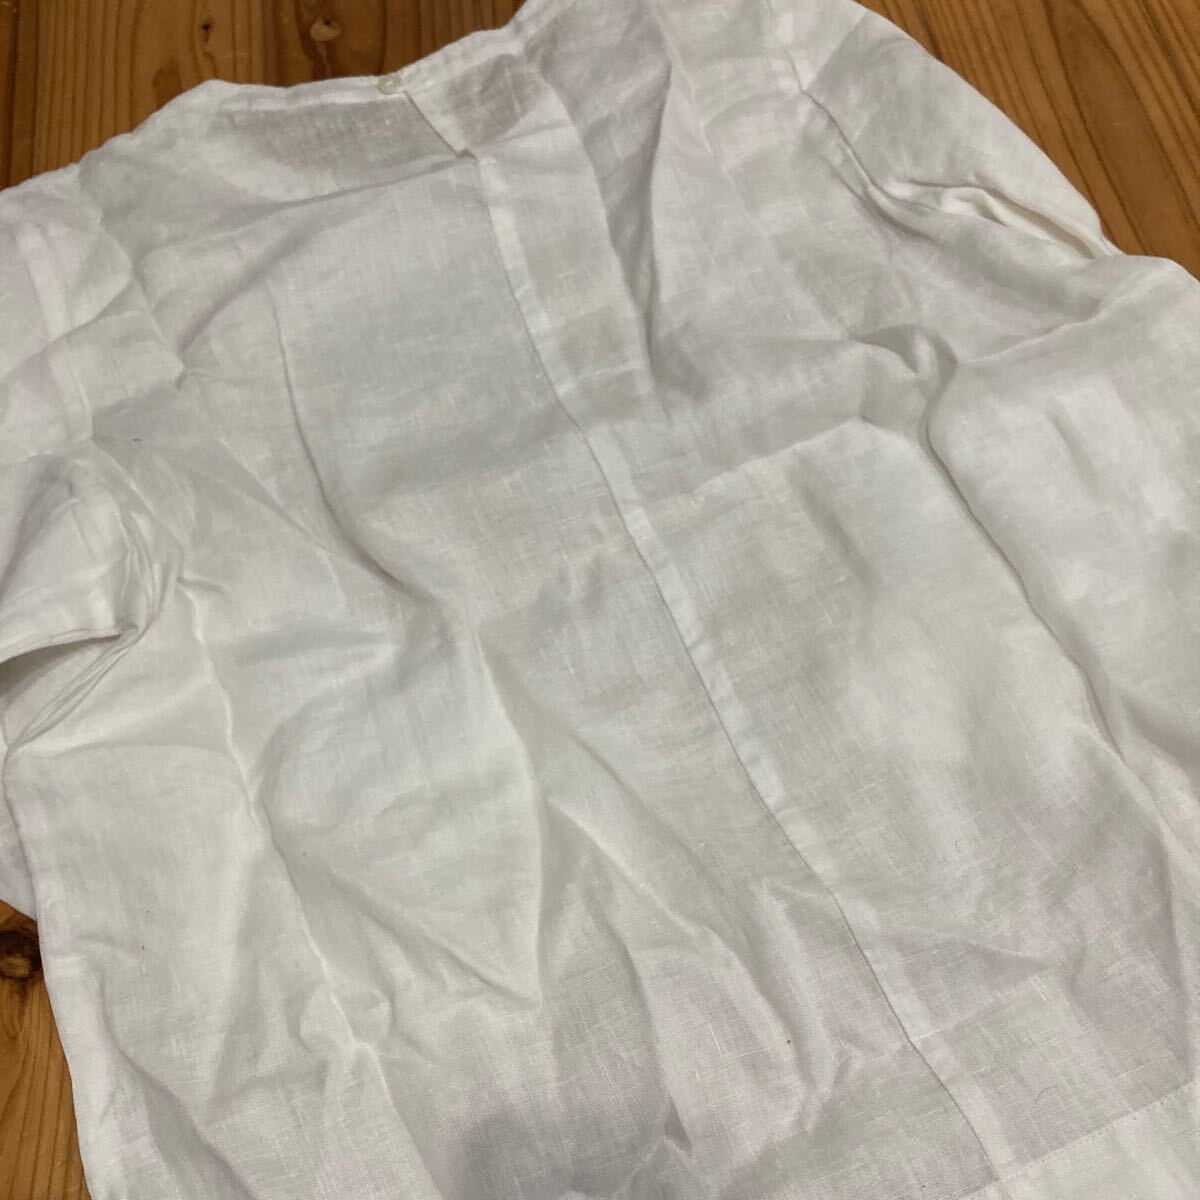  new goods prompt decision free shipping! Muji Ryohin linen wash ... 7 minute sleeve blouse woman white L size flax 100% complete sale goods 